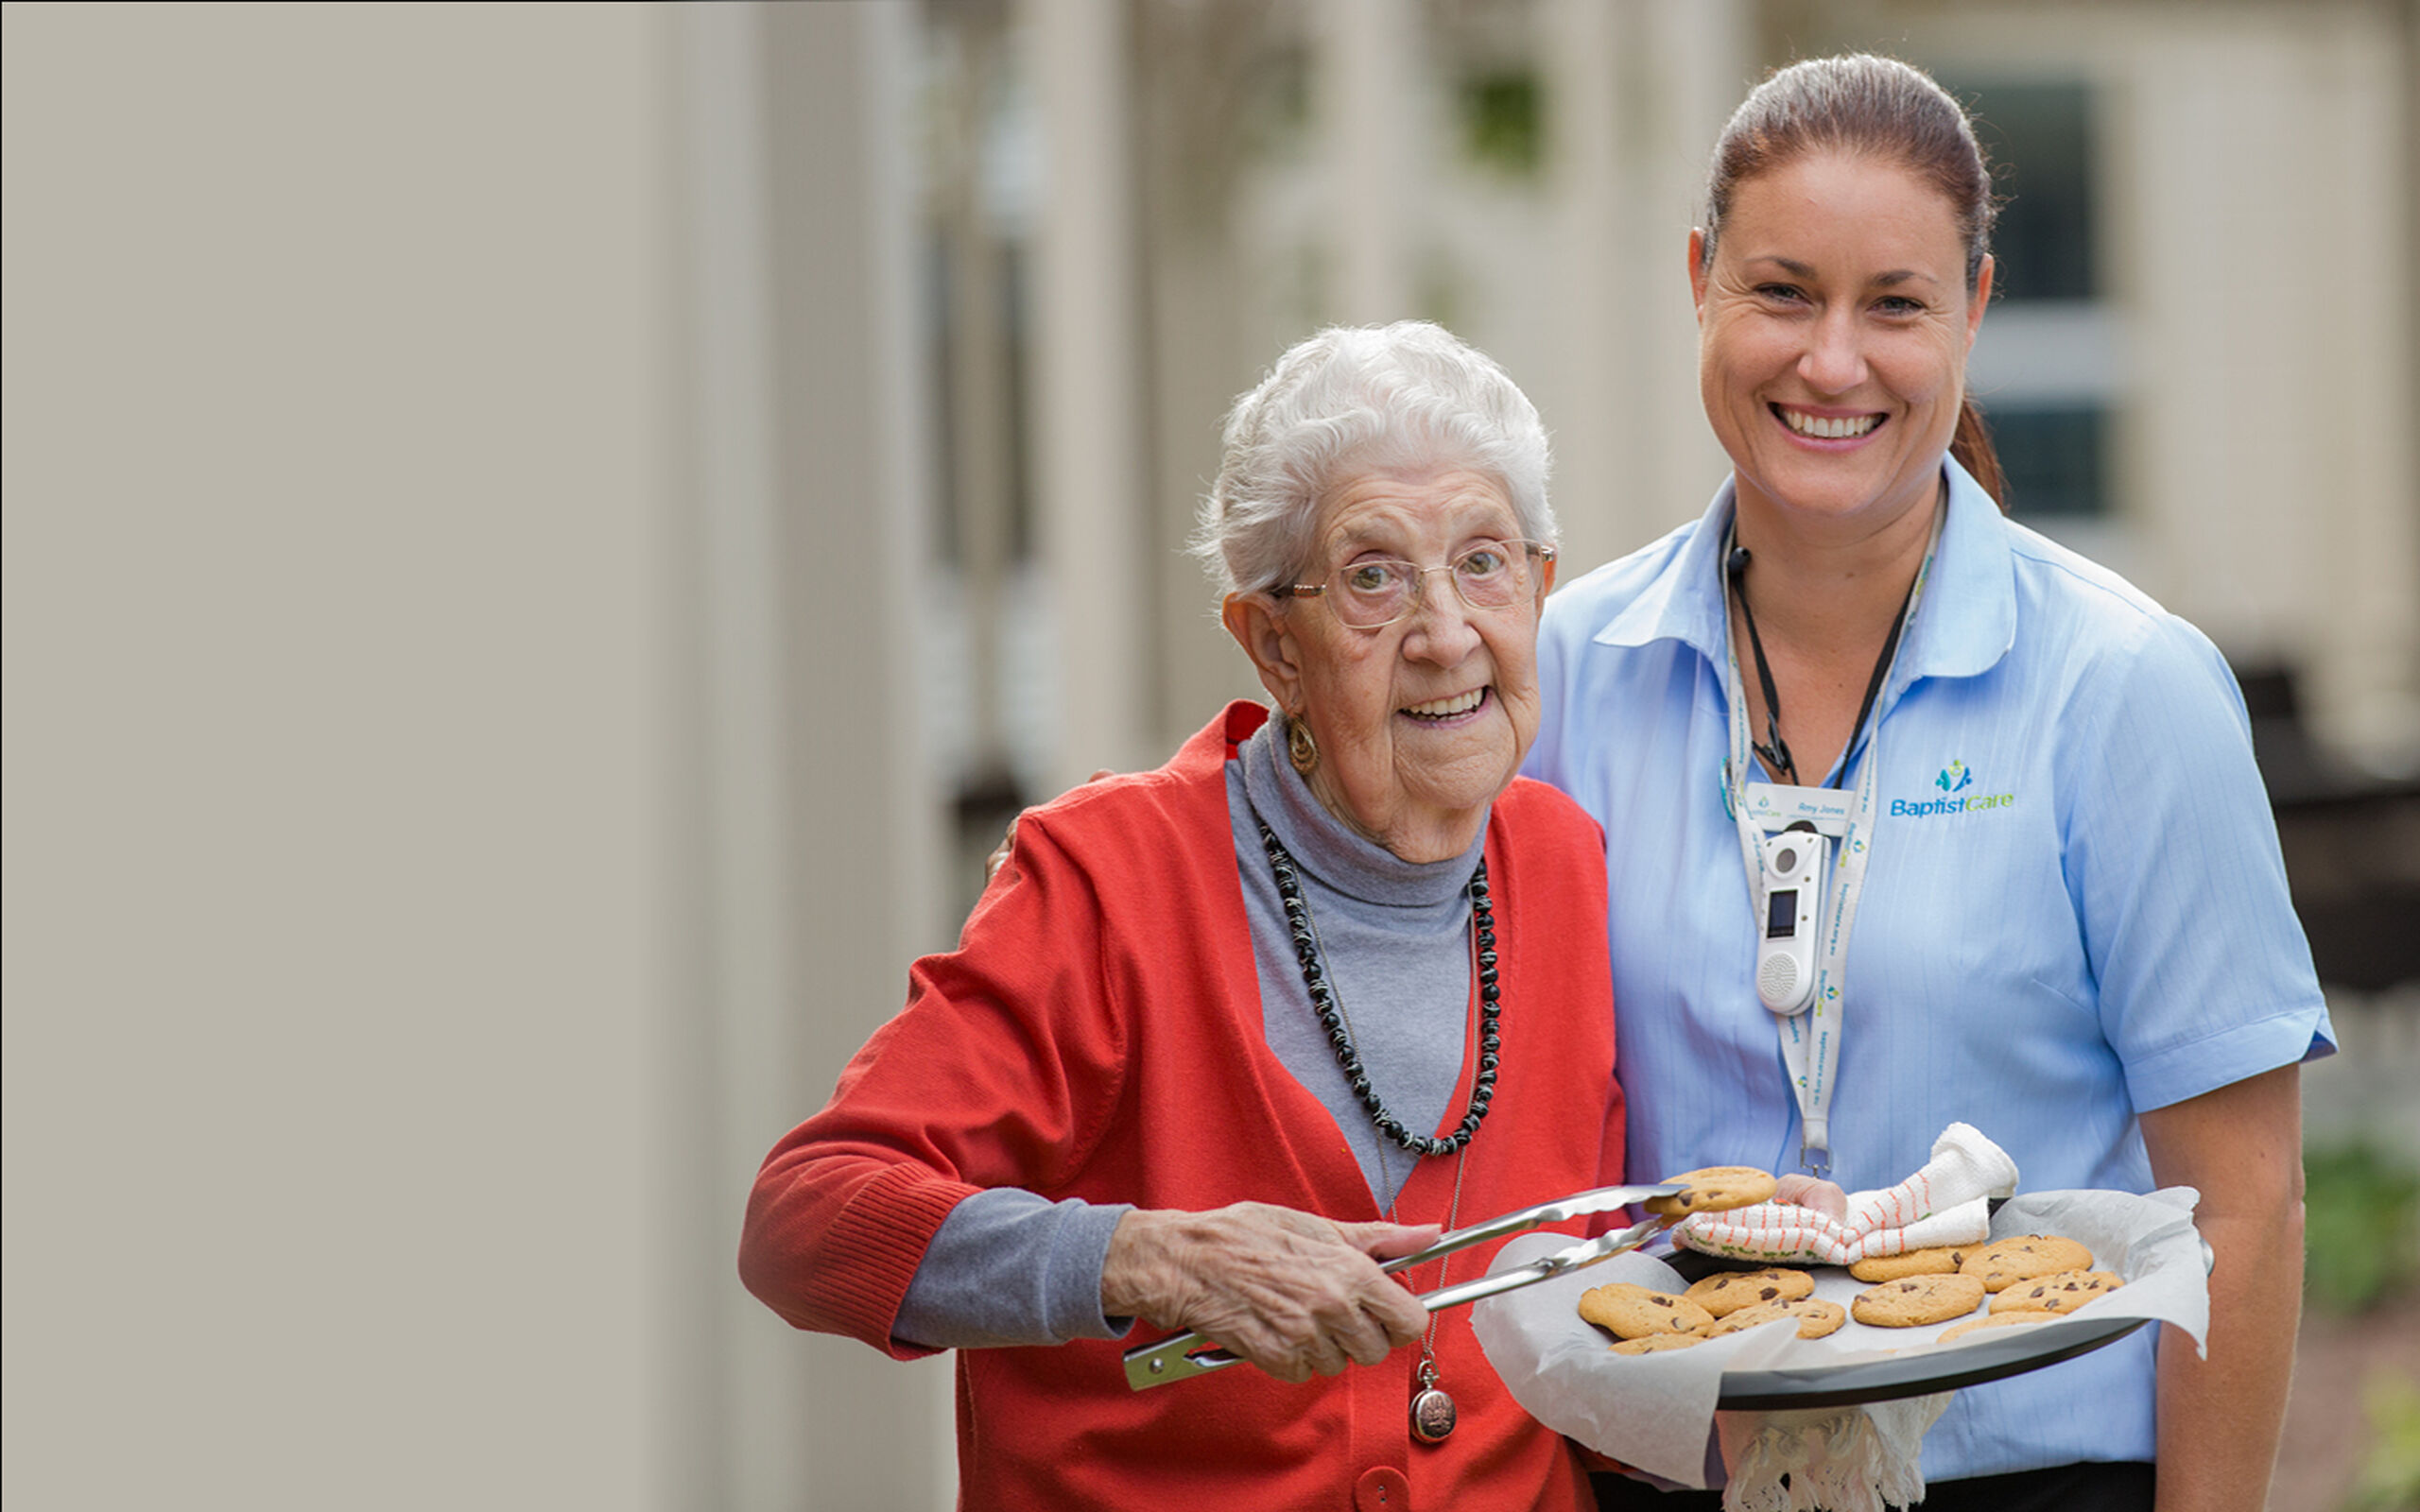 baptistcare residential aged care resident serving cookies with aged care employee